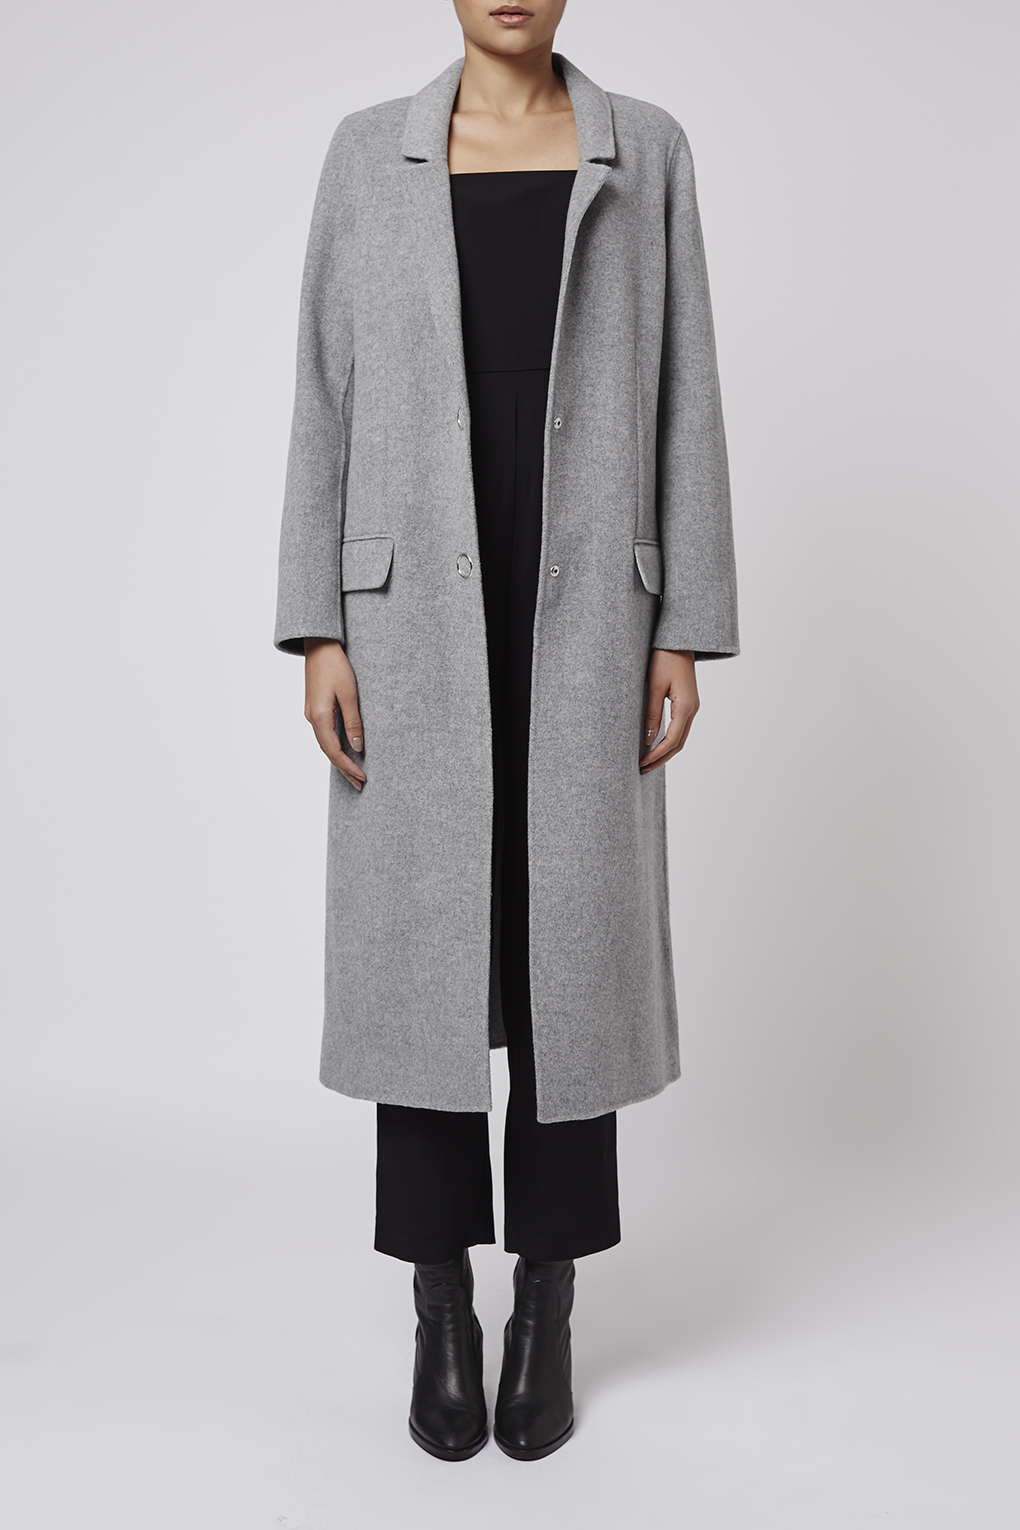 TOPSHOP Handmade Wool Duster Coat By Boutique in Grey (Gray) - Lyst